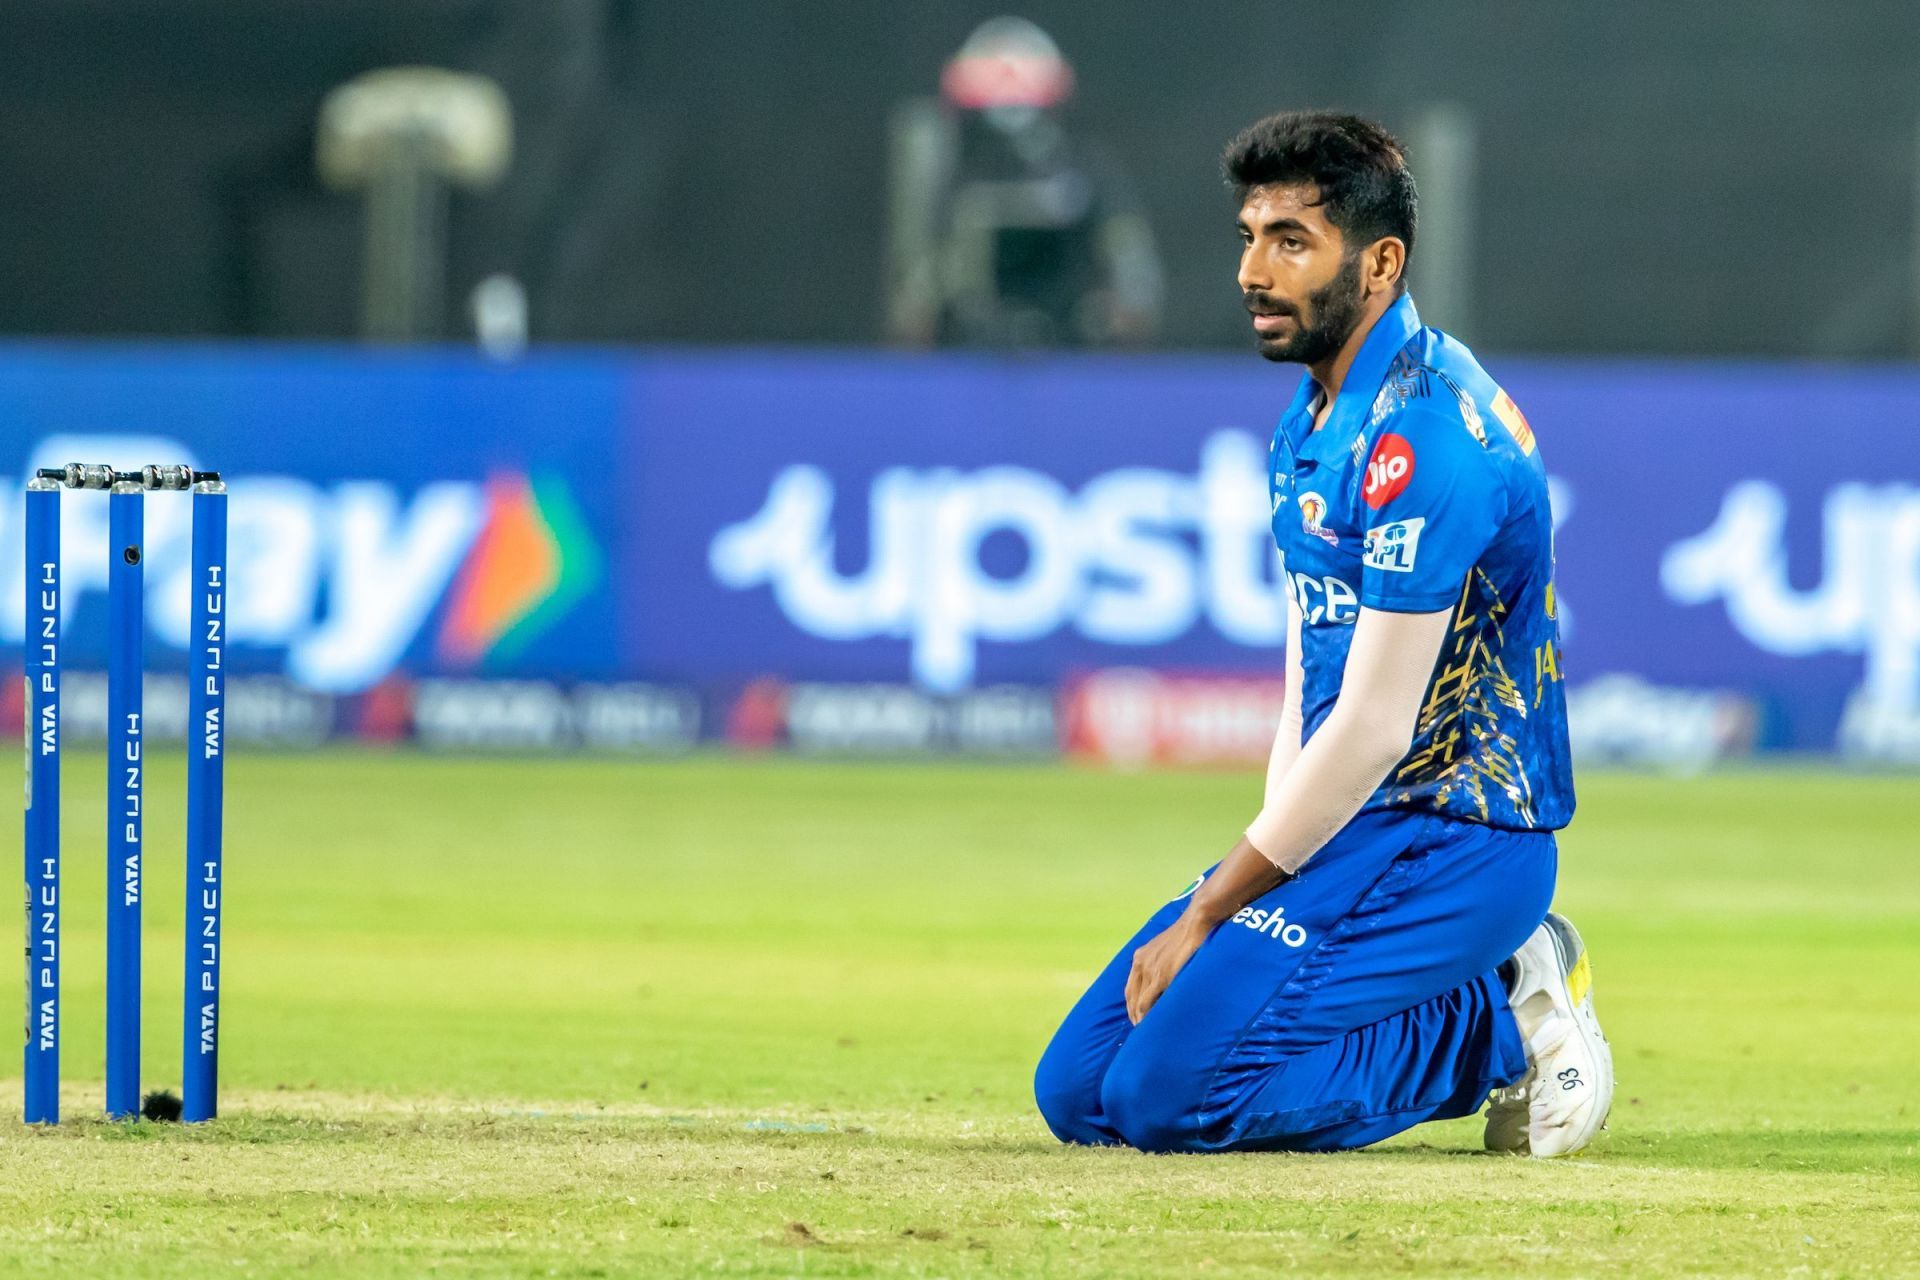 The Mumbai Indians will hope that Jasprit Bumrah is fully fit for next year&#039;s IPL. [P/C: iplt20.com]